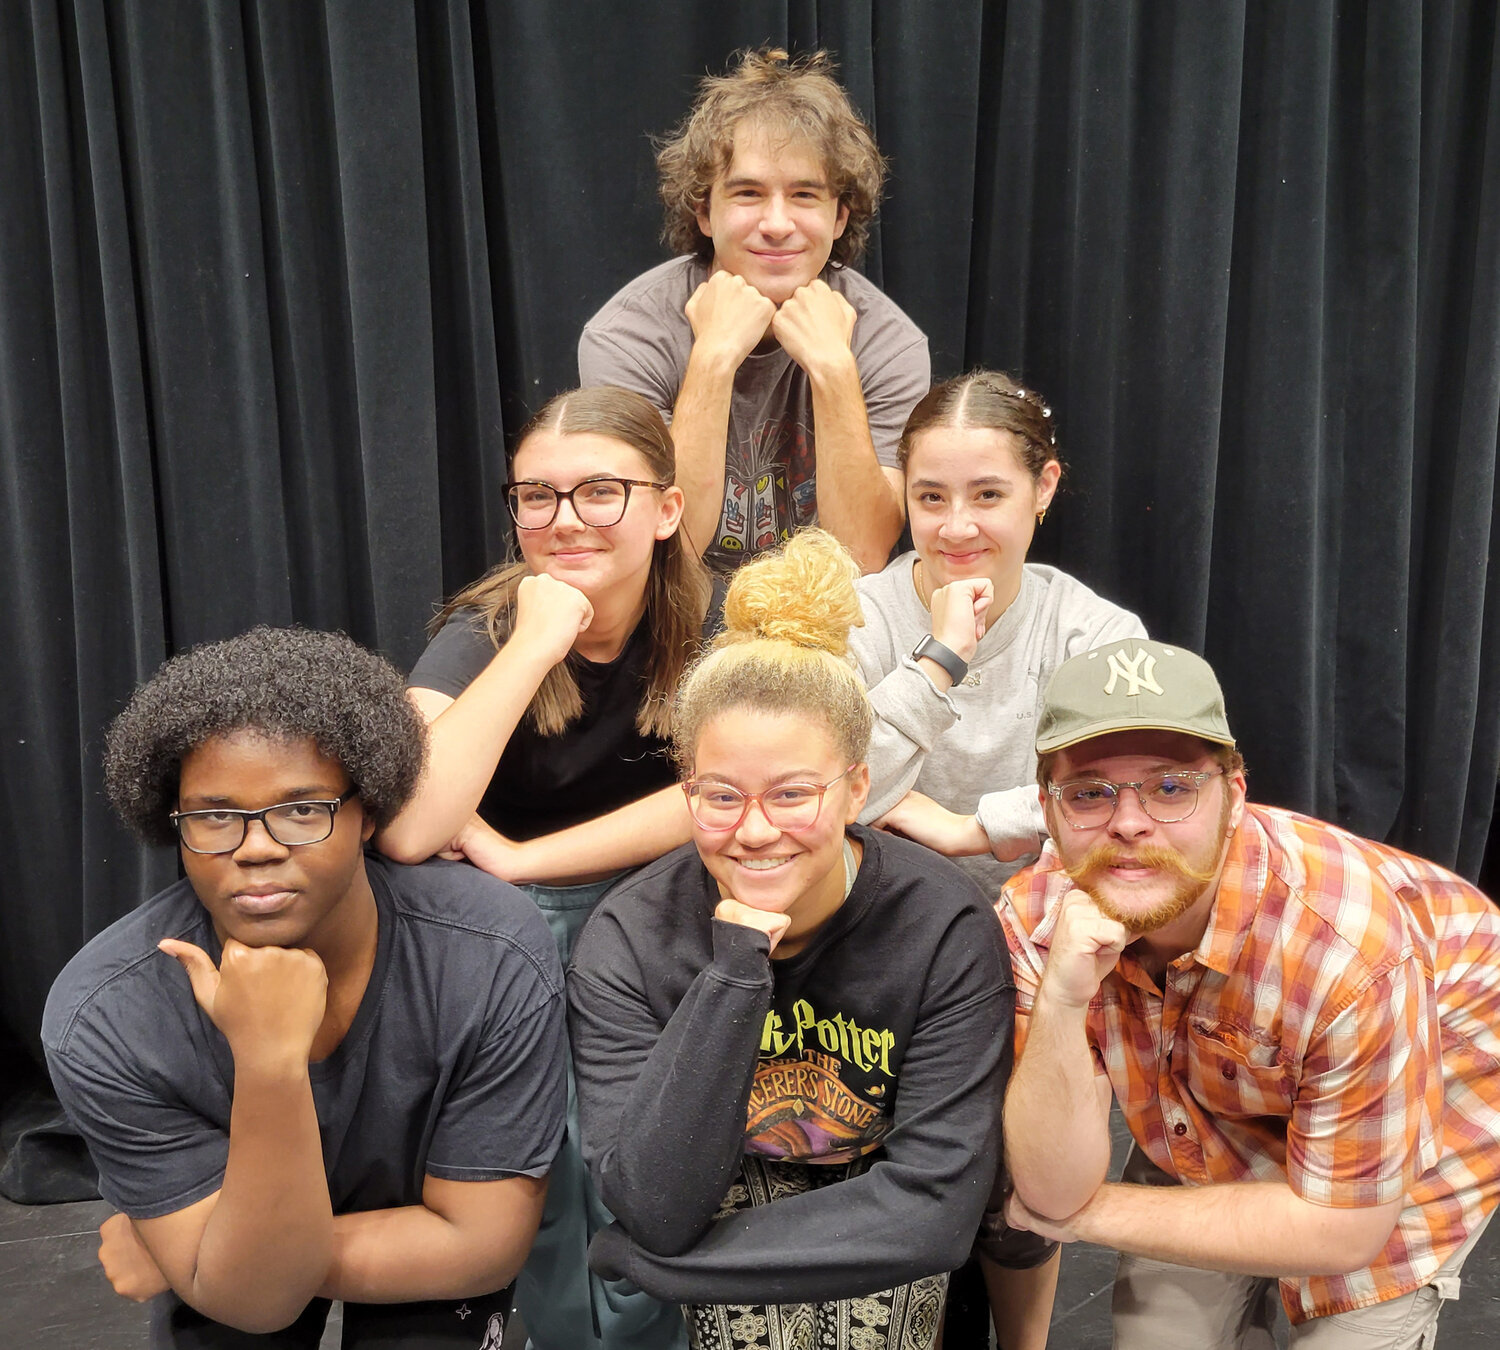 The cast of “Schoolhouse Rock Live!” includes: Jacob Kulwin, (top); Emily Bouchillon and Kaylah Serke (middle); Randy Jones, Victoria Vendryes and Liam Suhrie (L-R bottom).